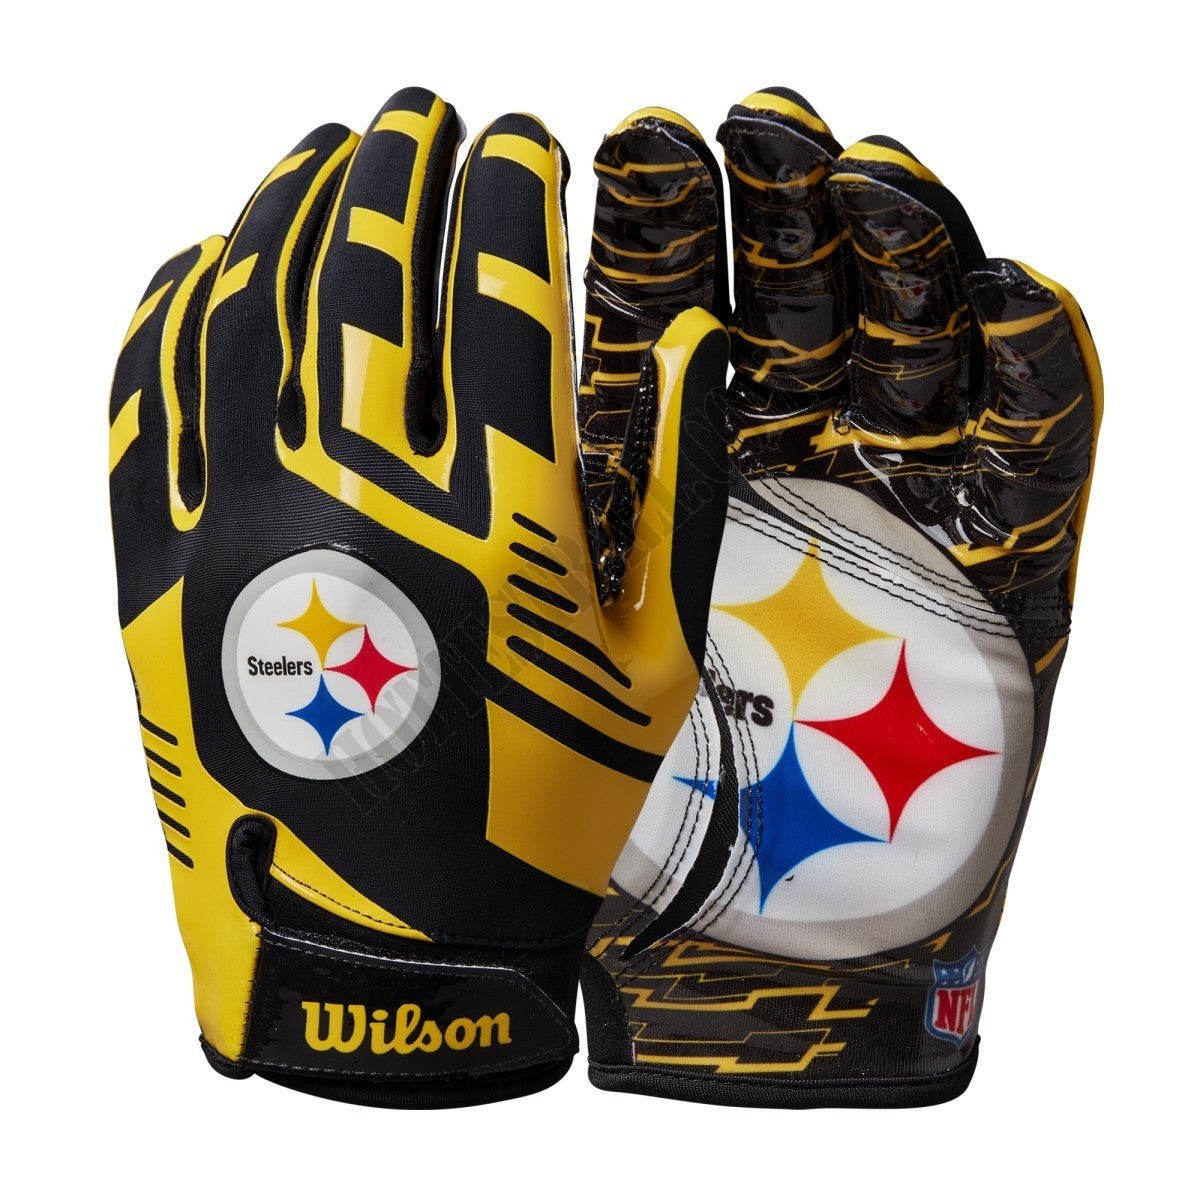 NFL Stretch Fit Receivers Gloves - Pittsburgh Steelers ● Wilson Promotions - NFL Stretch Fit Receivers Gloves - Pittsburgh Steelers ● Wilson Promotions